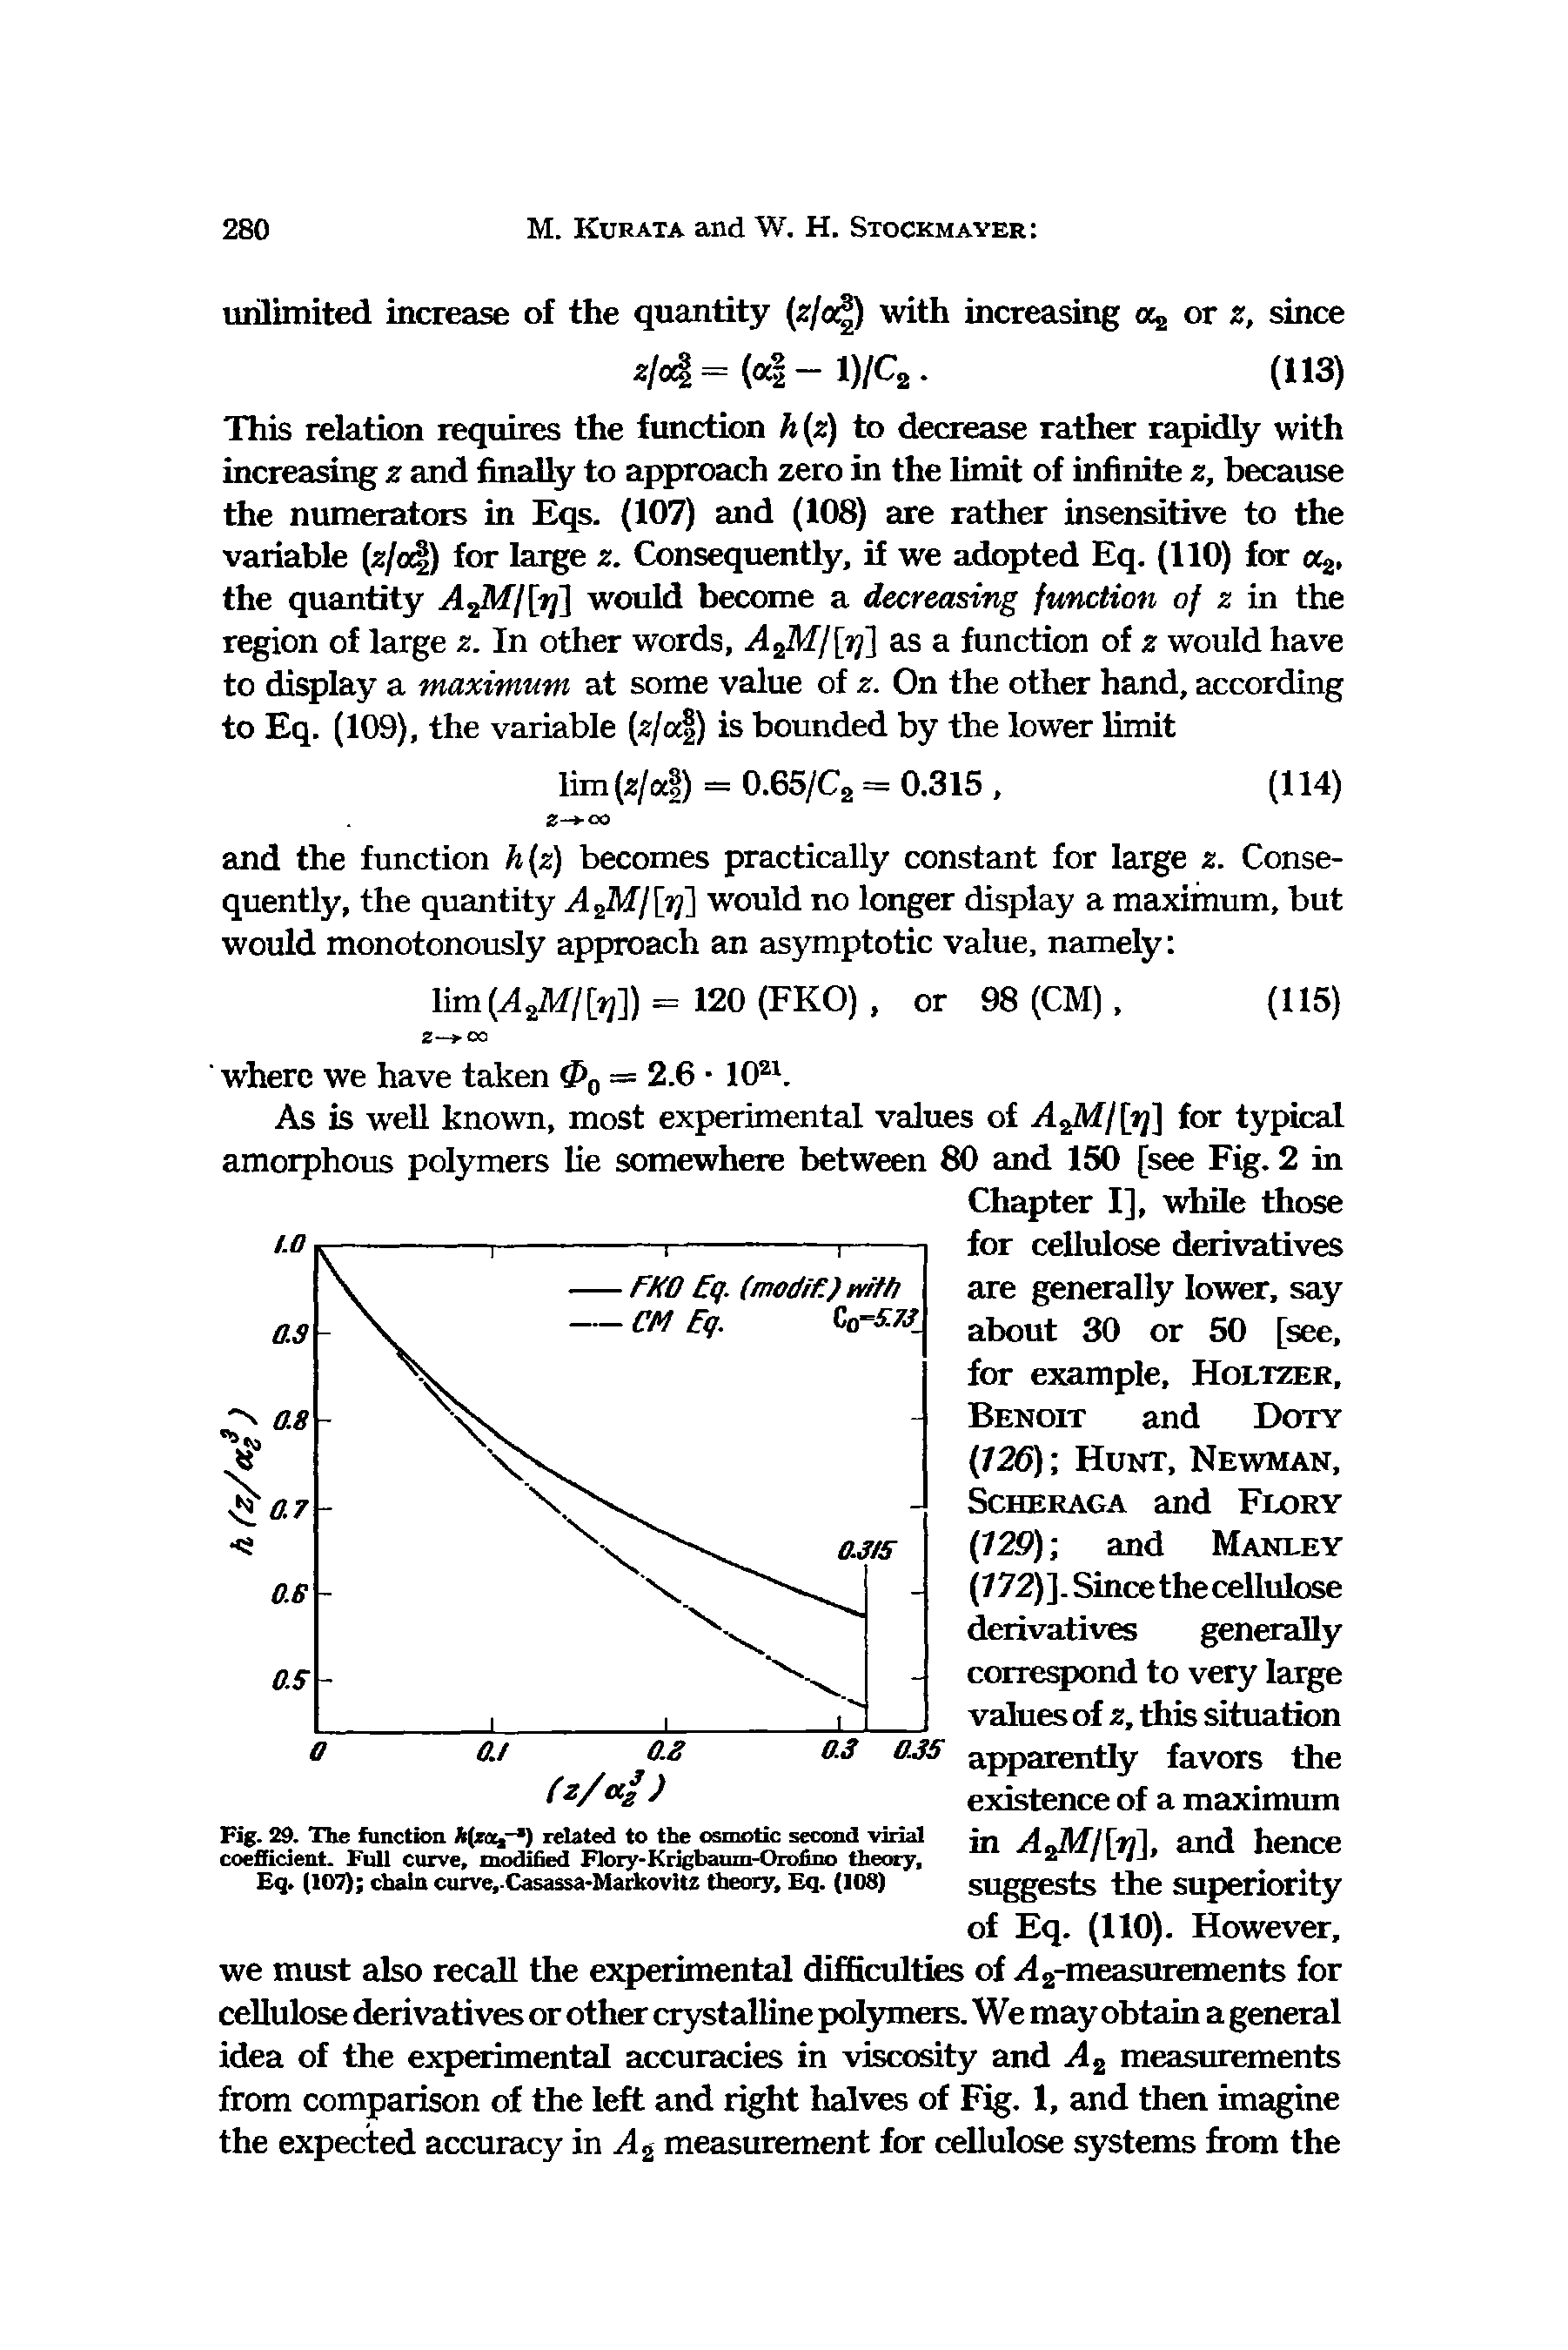 Fig. 29. The function Afroj- ) related to the osmotic second virial coefficient. Full curve, modified Flory- Krigbaum-Orofino theory, Eq. (107) chain curve, Casassa-Markovitz theory, Eq. (108)...